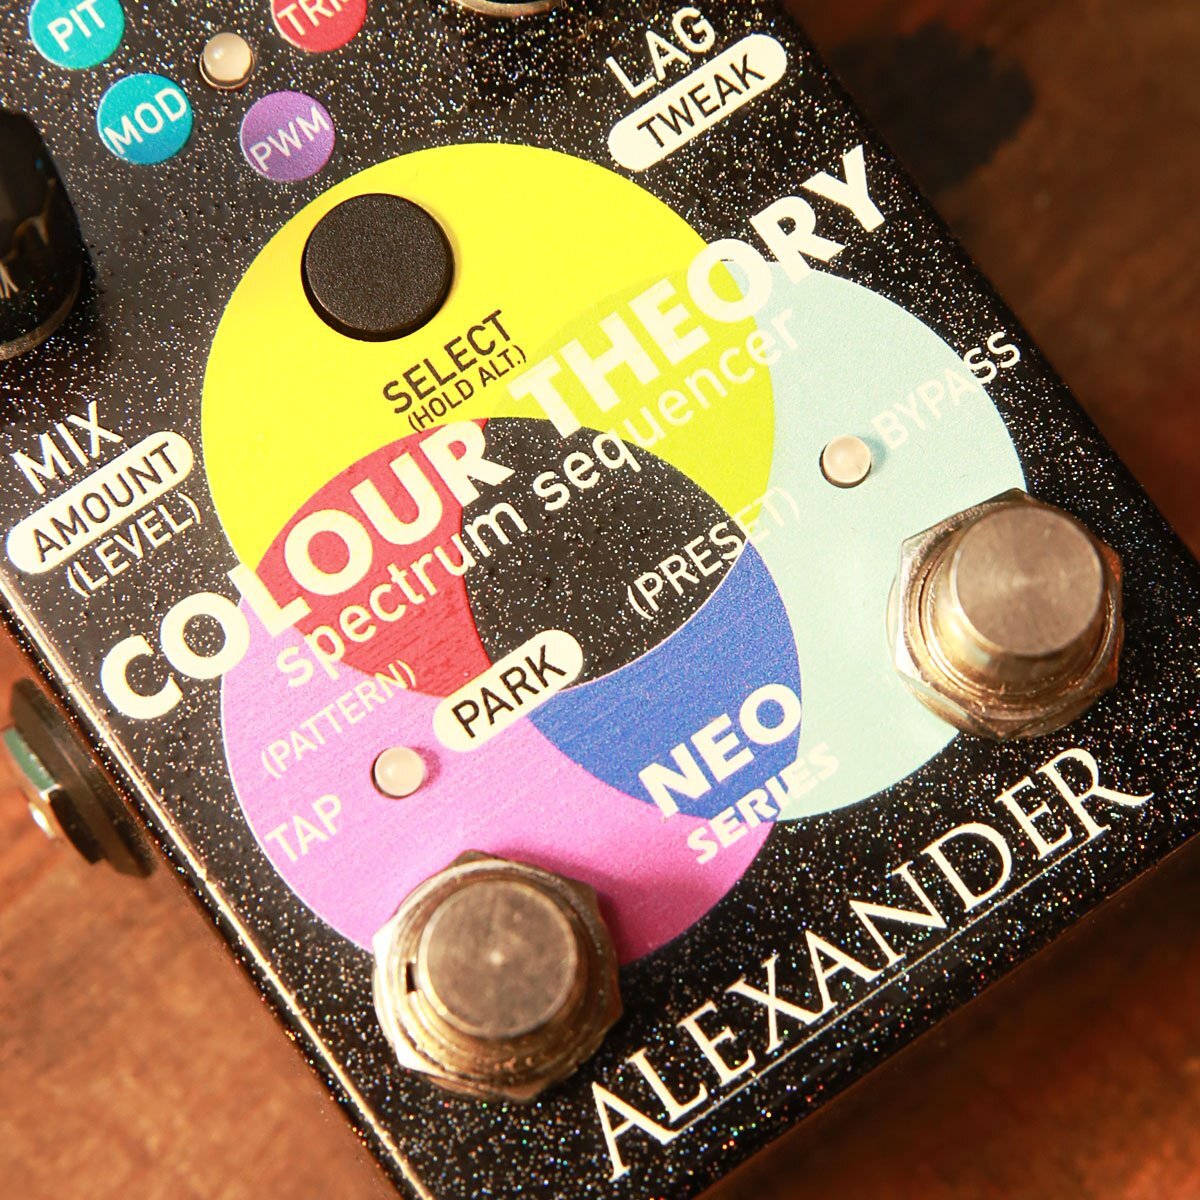  free shipping Alexander Pedalsarek Thunder pedal zColour Theory color * theory moju ration effector inspection goods settled shipping 